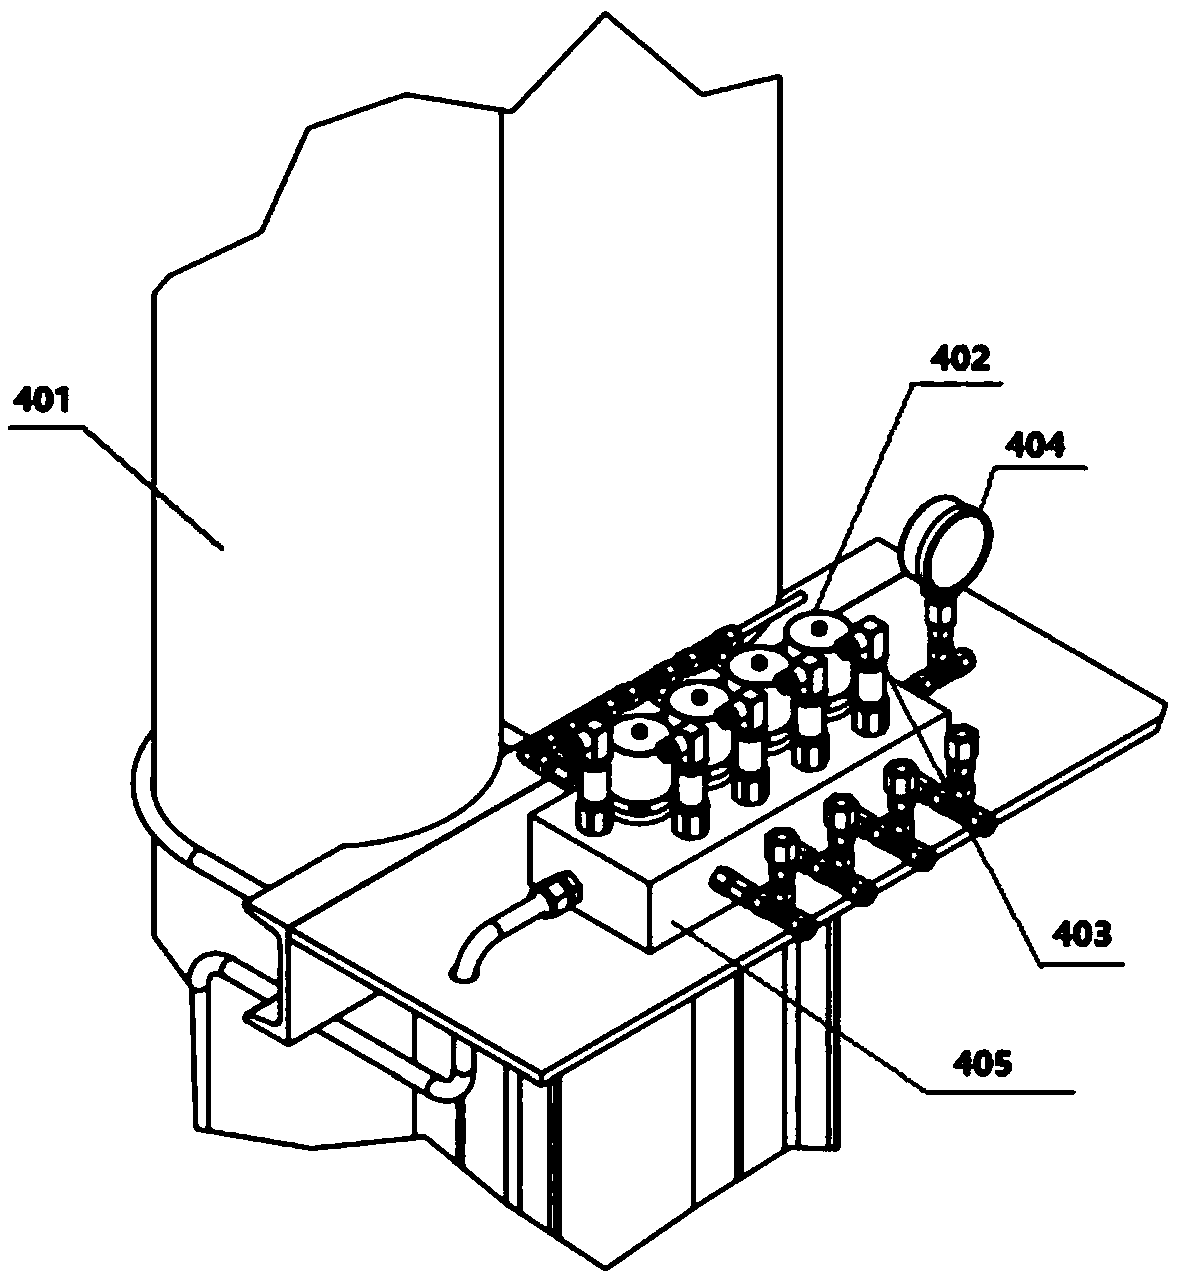 Multi-stage sequence triggered emergency system capable of automatically shearing tubular column and sealing borehole